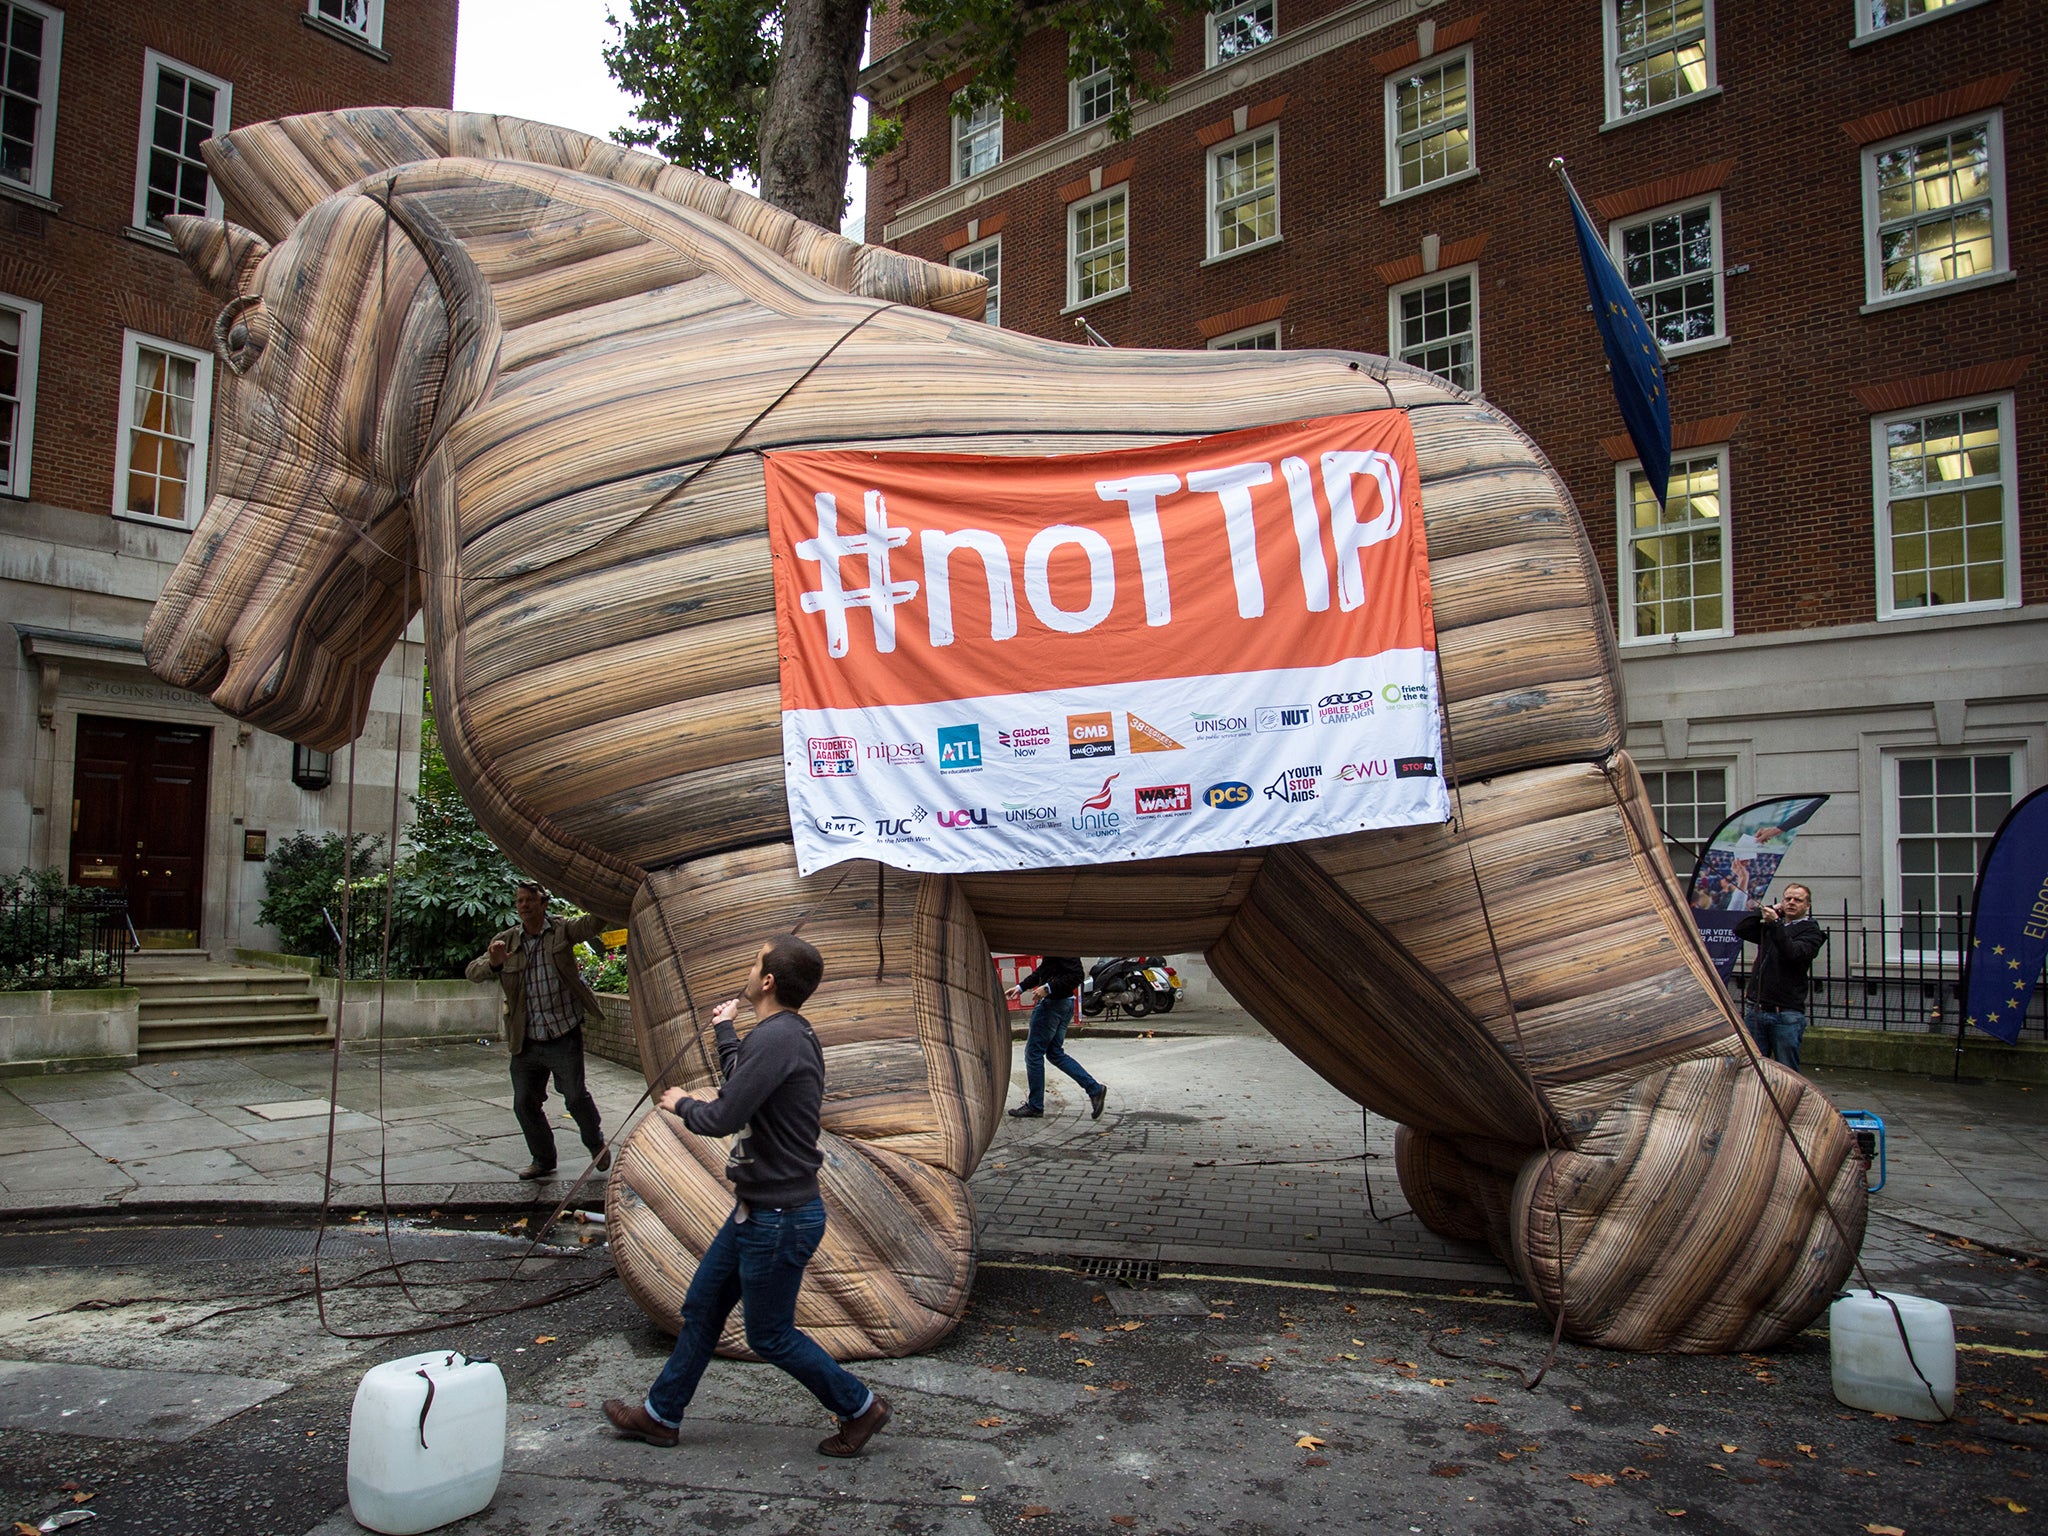 Transatlantic Trade and Investment Partnership (TTIP) - a trade deal between the USA and EU  